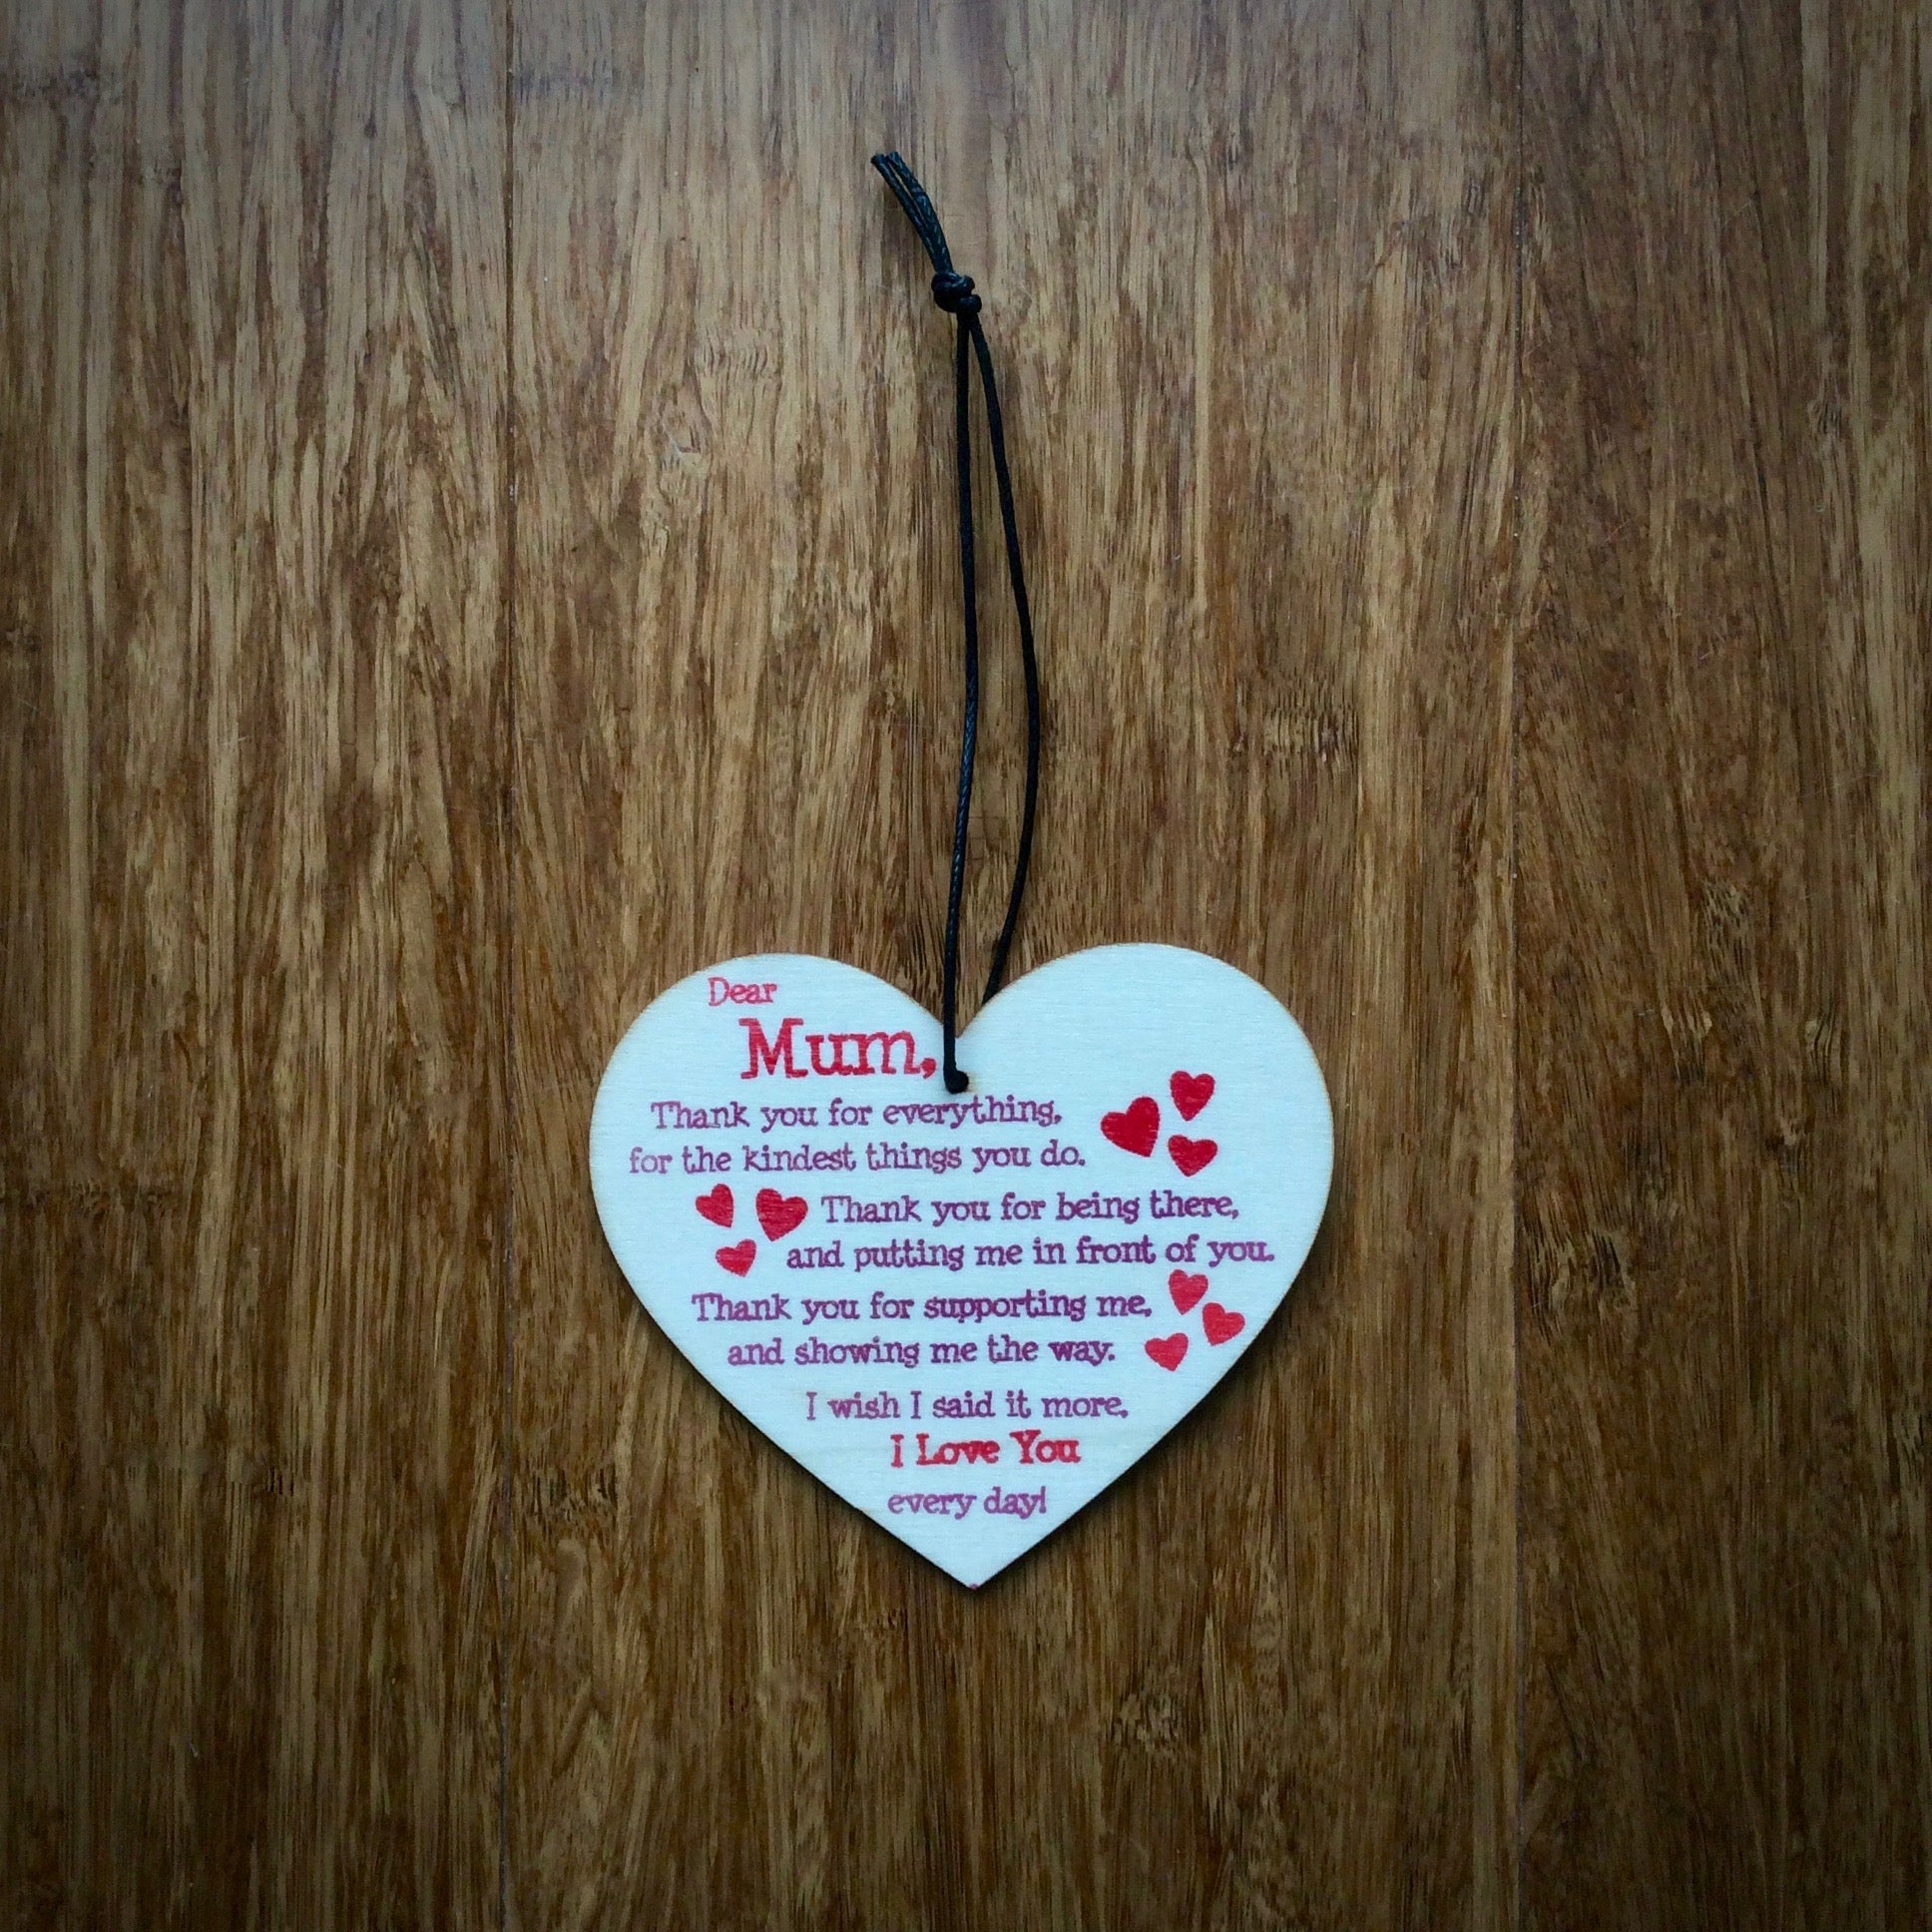 I Love You Everyday Mum Wooden Heart Plaque